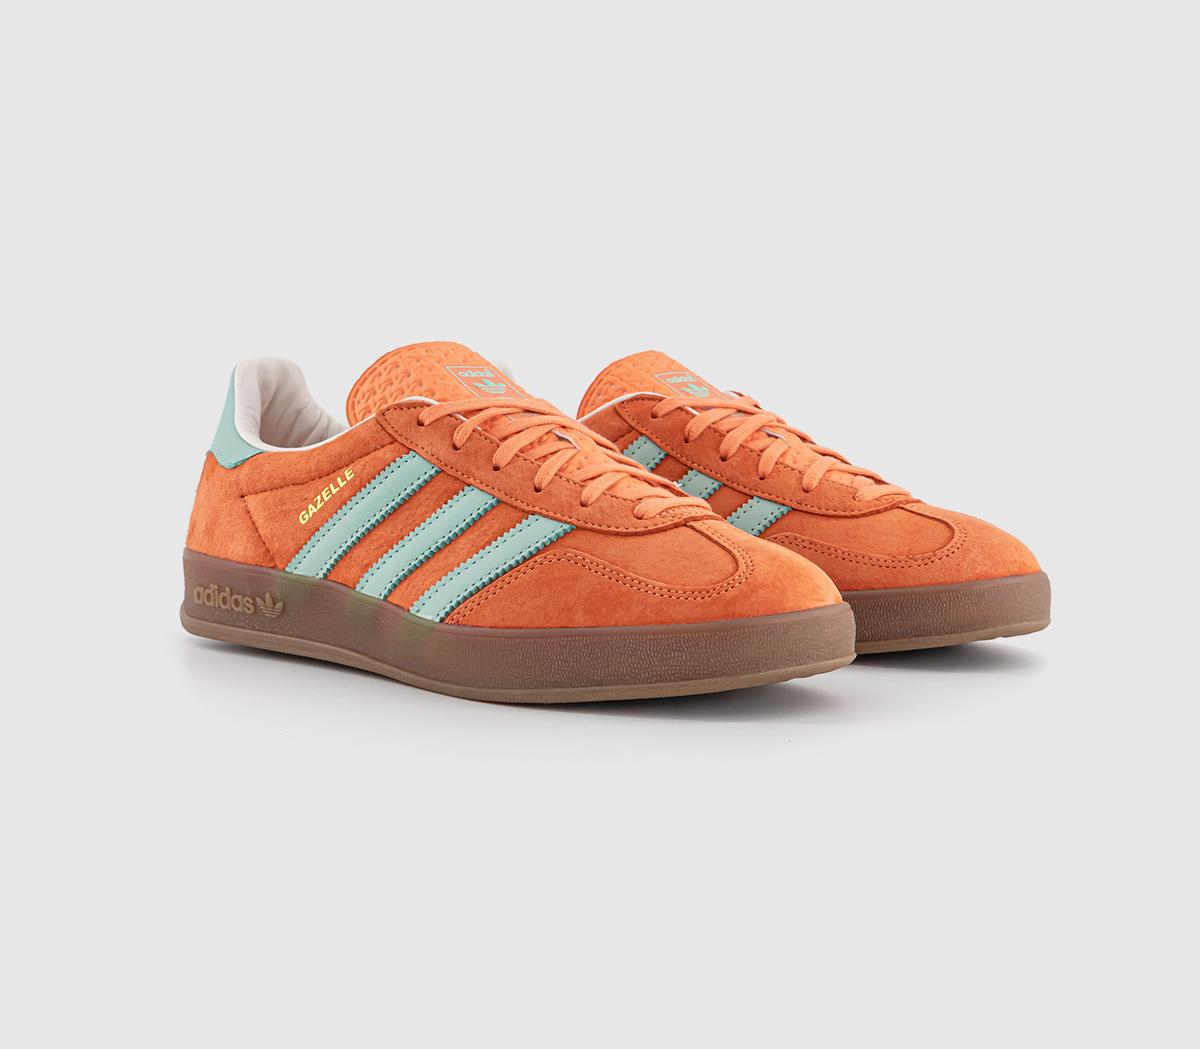 Adidas Gazelle Indoor Trainers Easy Orange Clear Mint Gum Red, 4.5